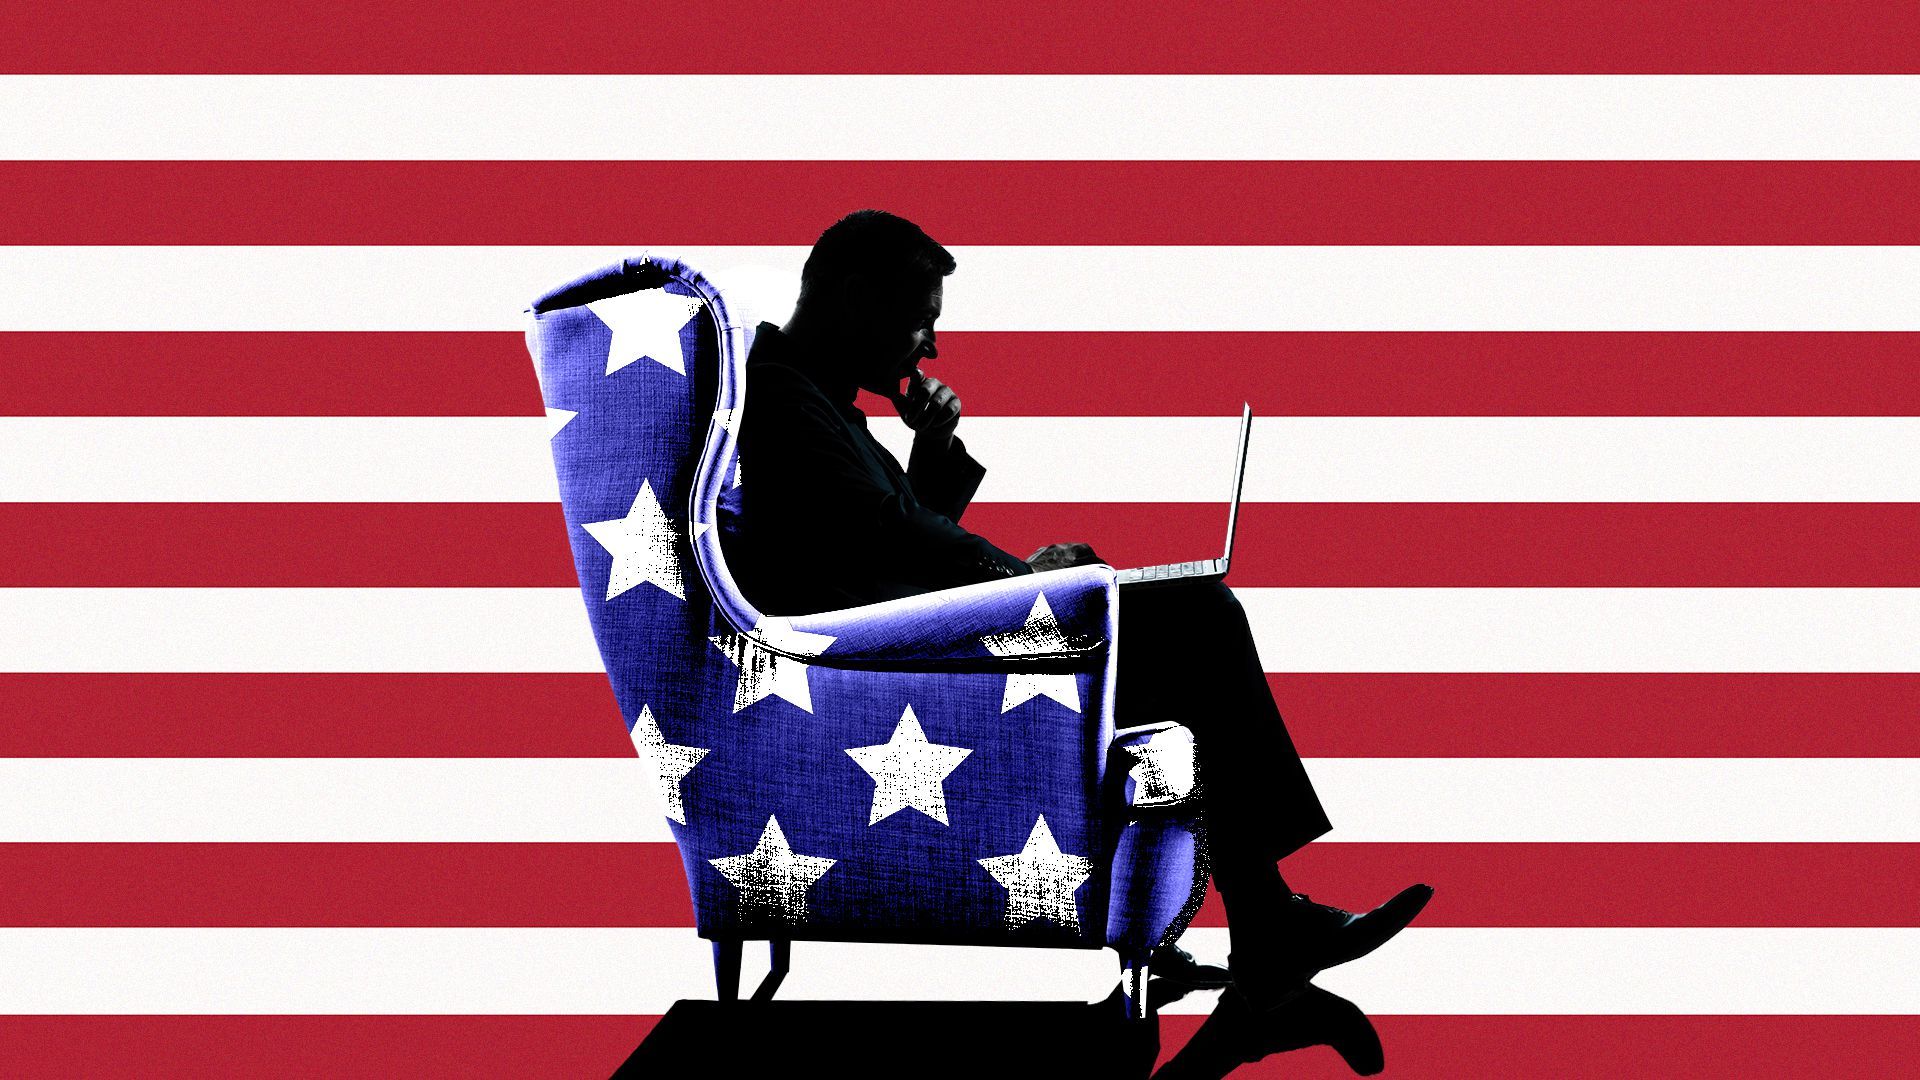 Illustration of a silhouetted person staring at a laptop and sitting in an armchair with stars resembling the U.S. flag, while in the background are the U.S. flag stripes.